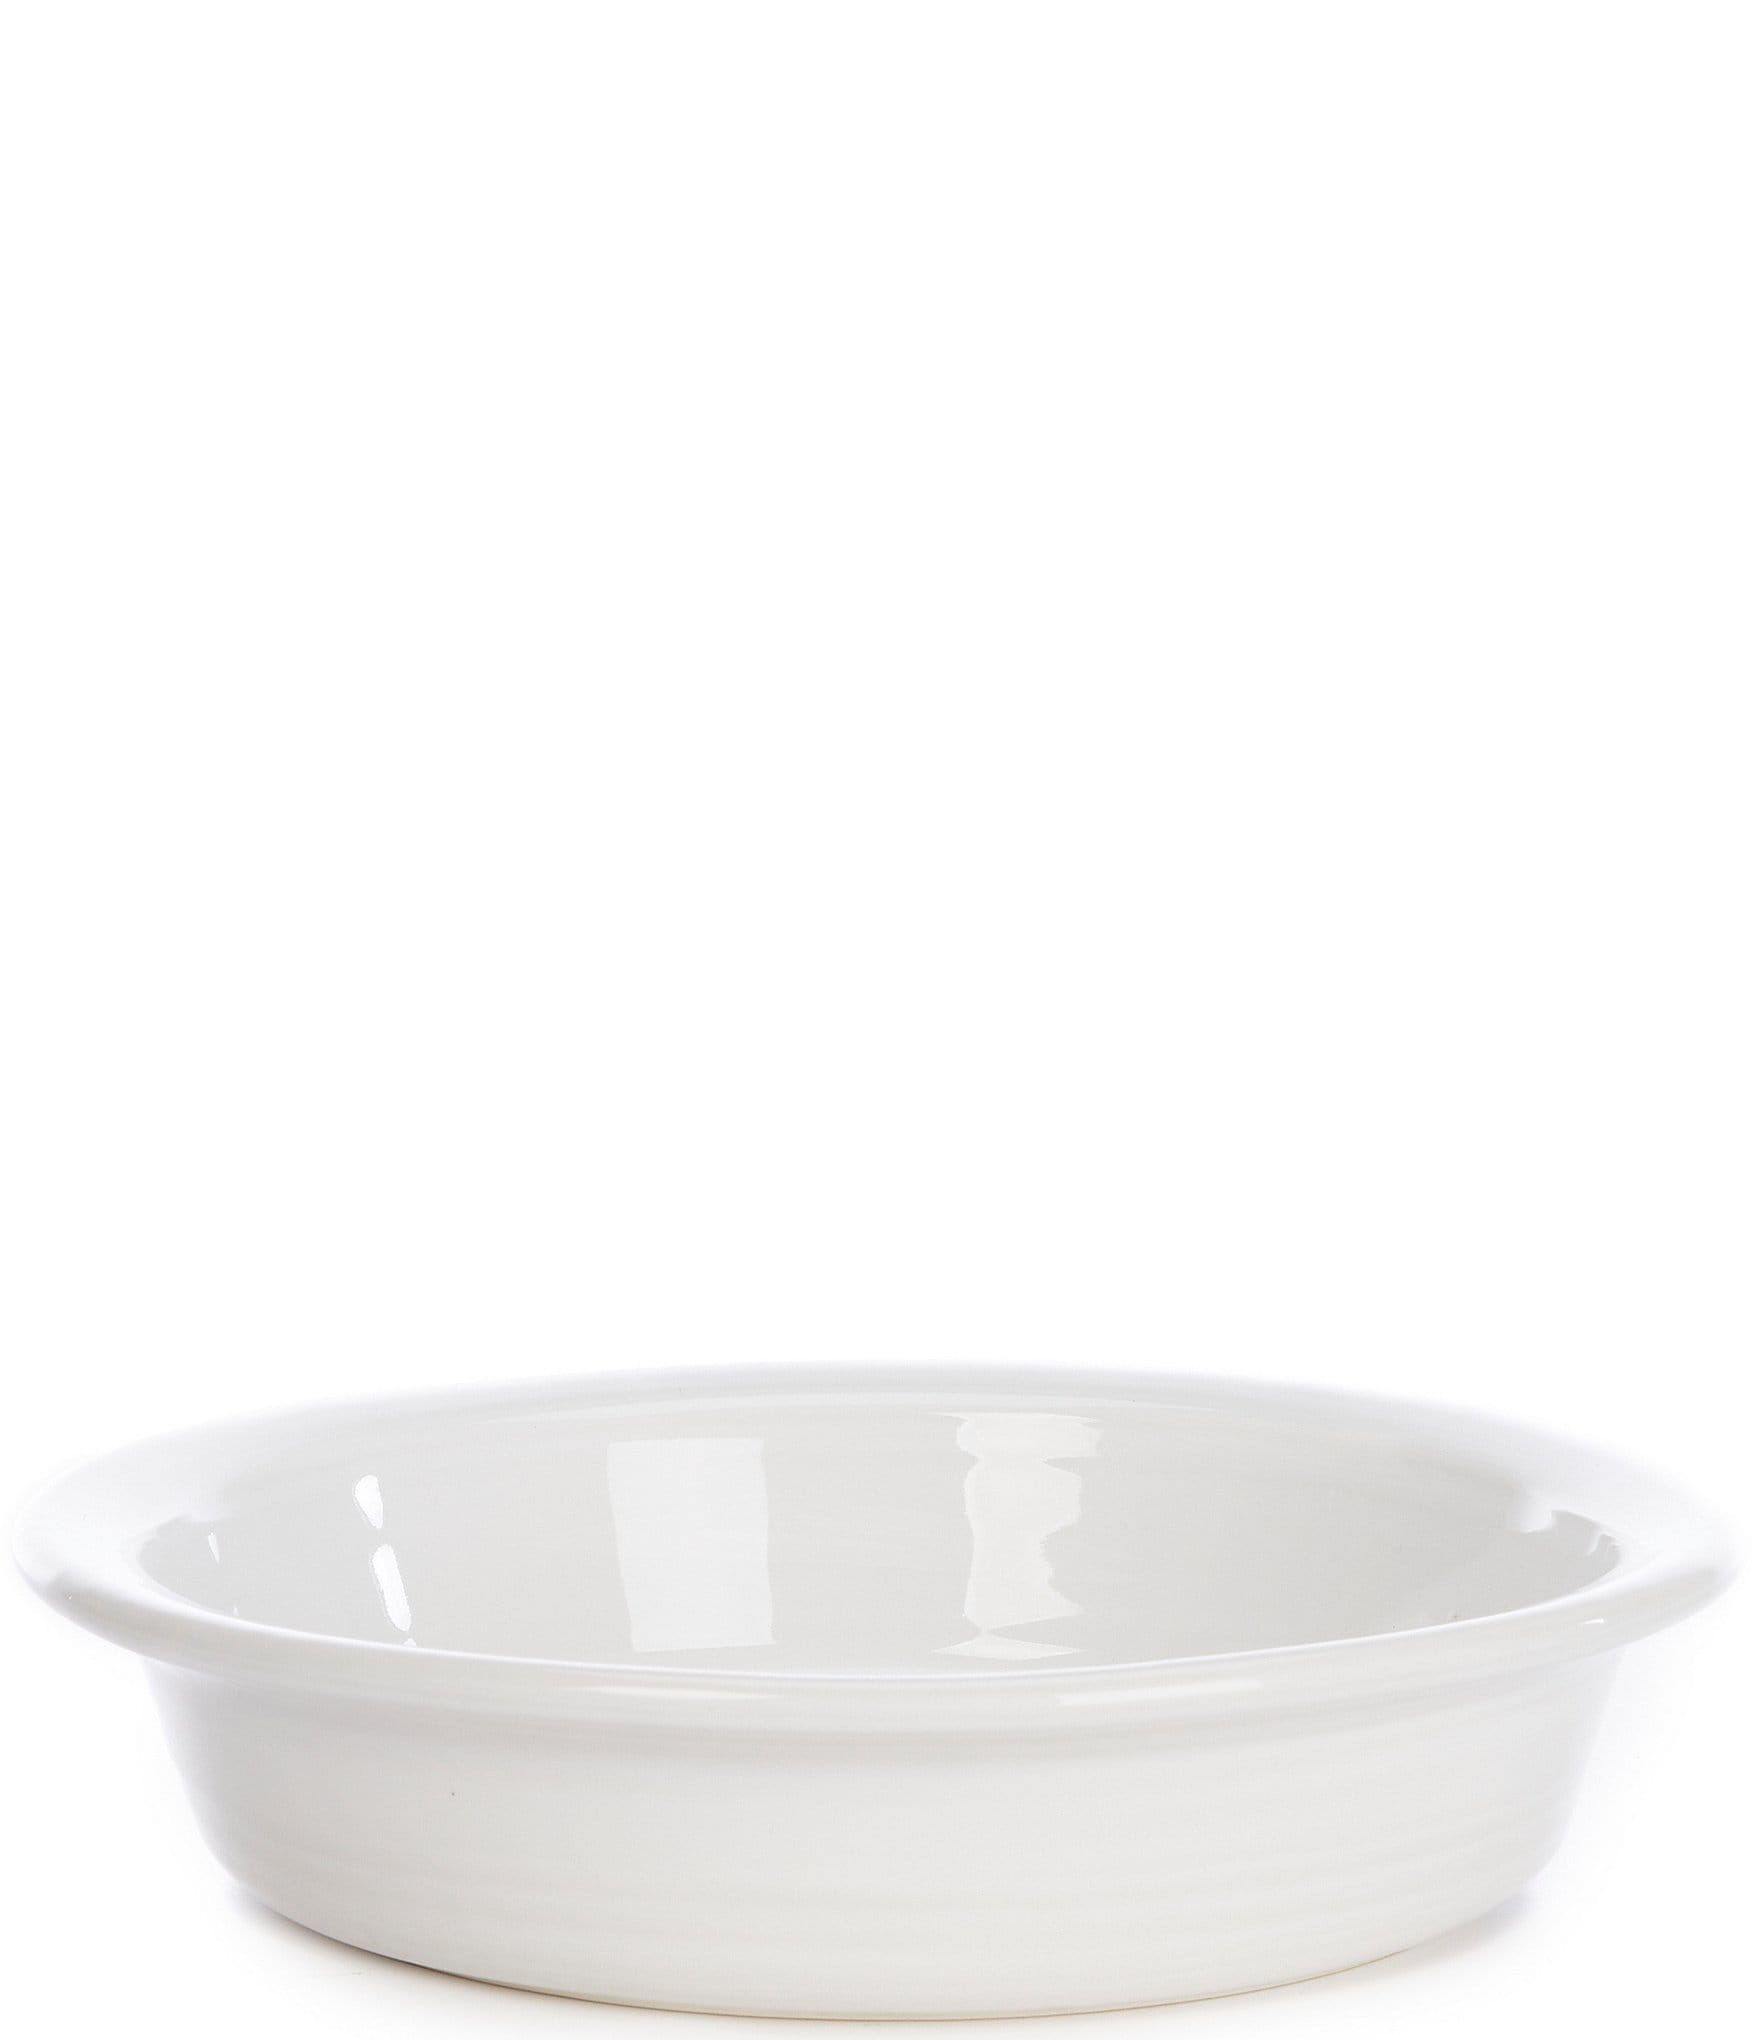 https://dimg.dillards.com/is/image/DillardsZoom/zoom/southern-living-simplicity-collection-glazed-white-pie-dish/00000000_zi_bde484d6-2062-4fef-a4d4-e3e34d49ac2f.jpg